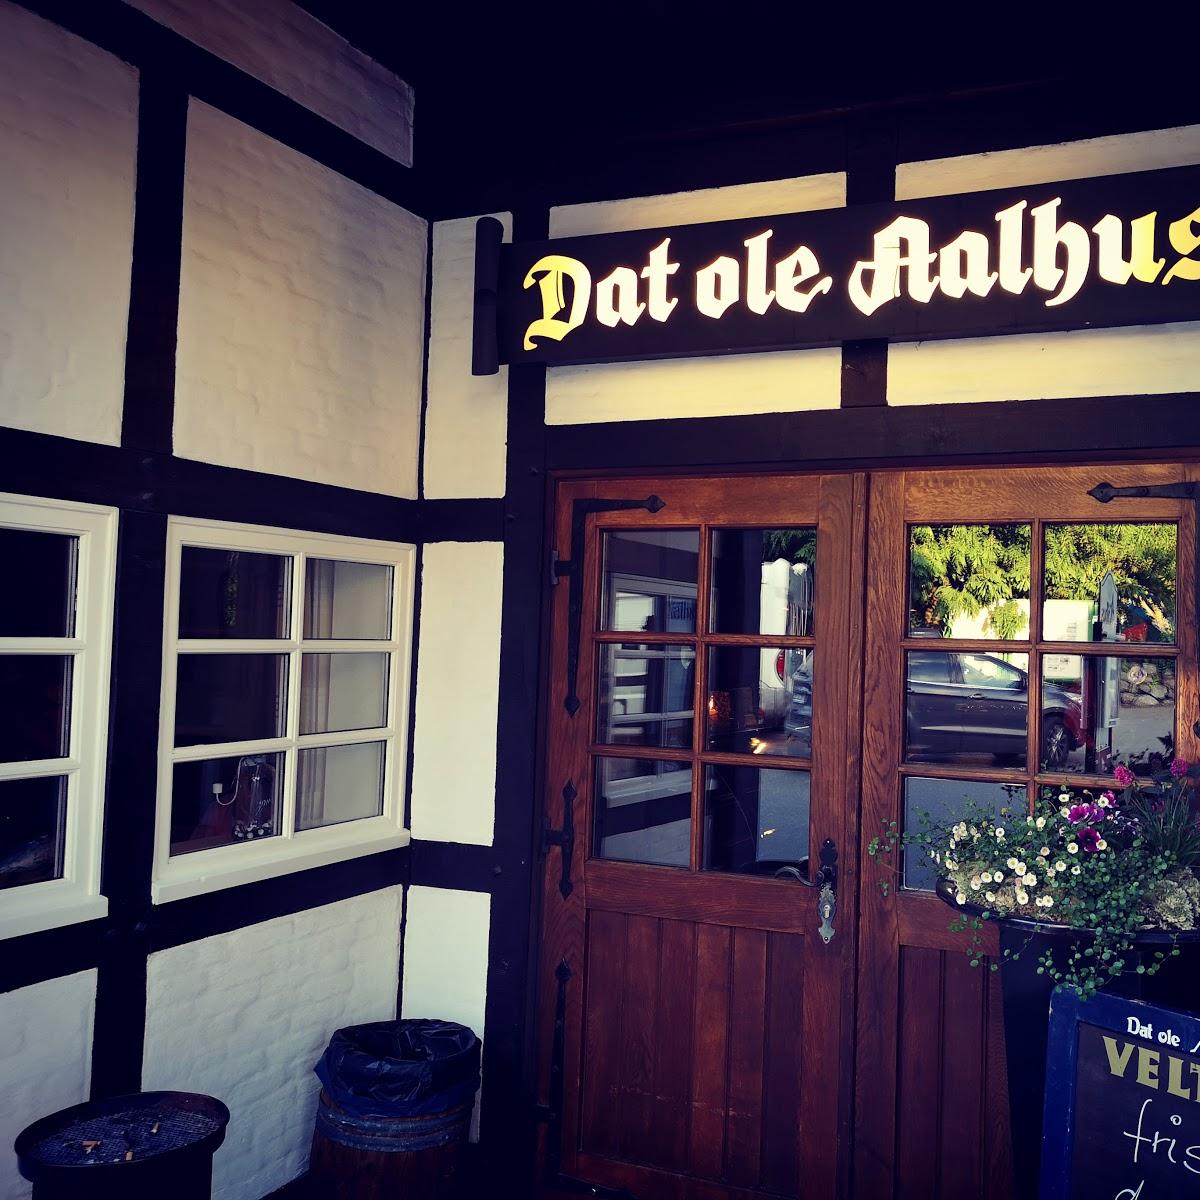 Restaurant "Dat ole Aalhus" in  Fehmarn